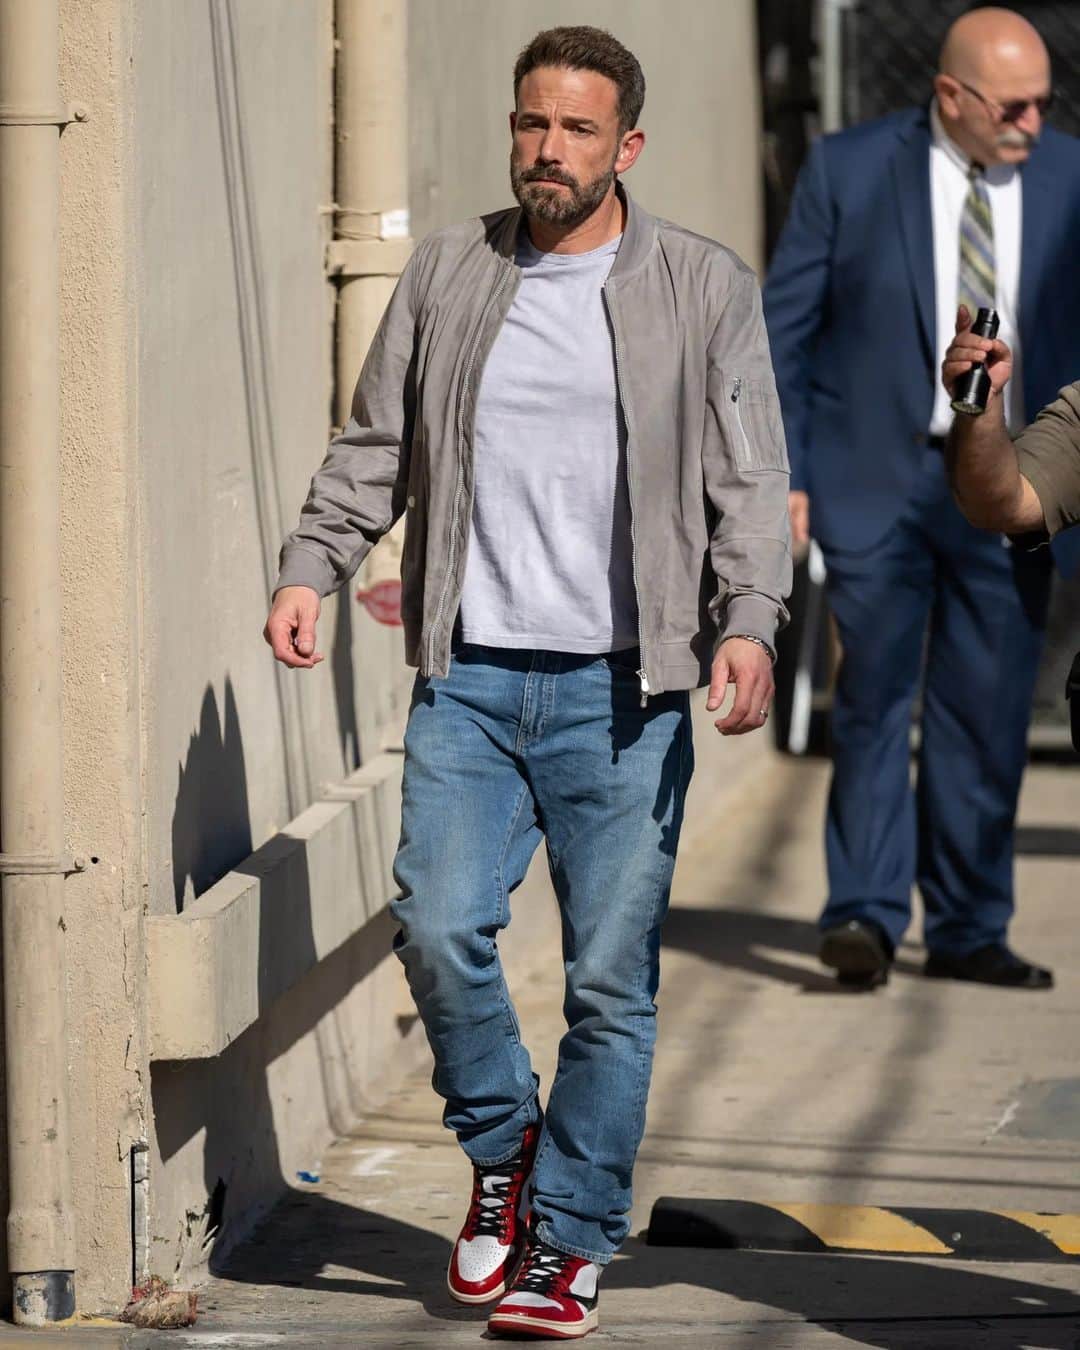 GQのインスタグラム：「Ben Affleck is a low-key sneaker legend. He sent the online sneakerhead community into an uproar by wearing the unreleased Travis Scott x Air Jordan 1 High OG ‘Chicago,’ which no one had seen before. This month, he was spotted walking around in the “Skate Like a Girl” Dunks from Nike SB—as well as another pair of Travis Scott Jordan 1s, this time the low-top mochas.   This is no gimmick. Ben Affleck is a bona fide sneakerhead. Read more at the link in bio.」